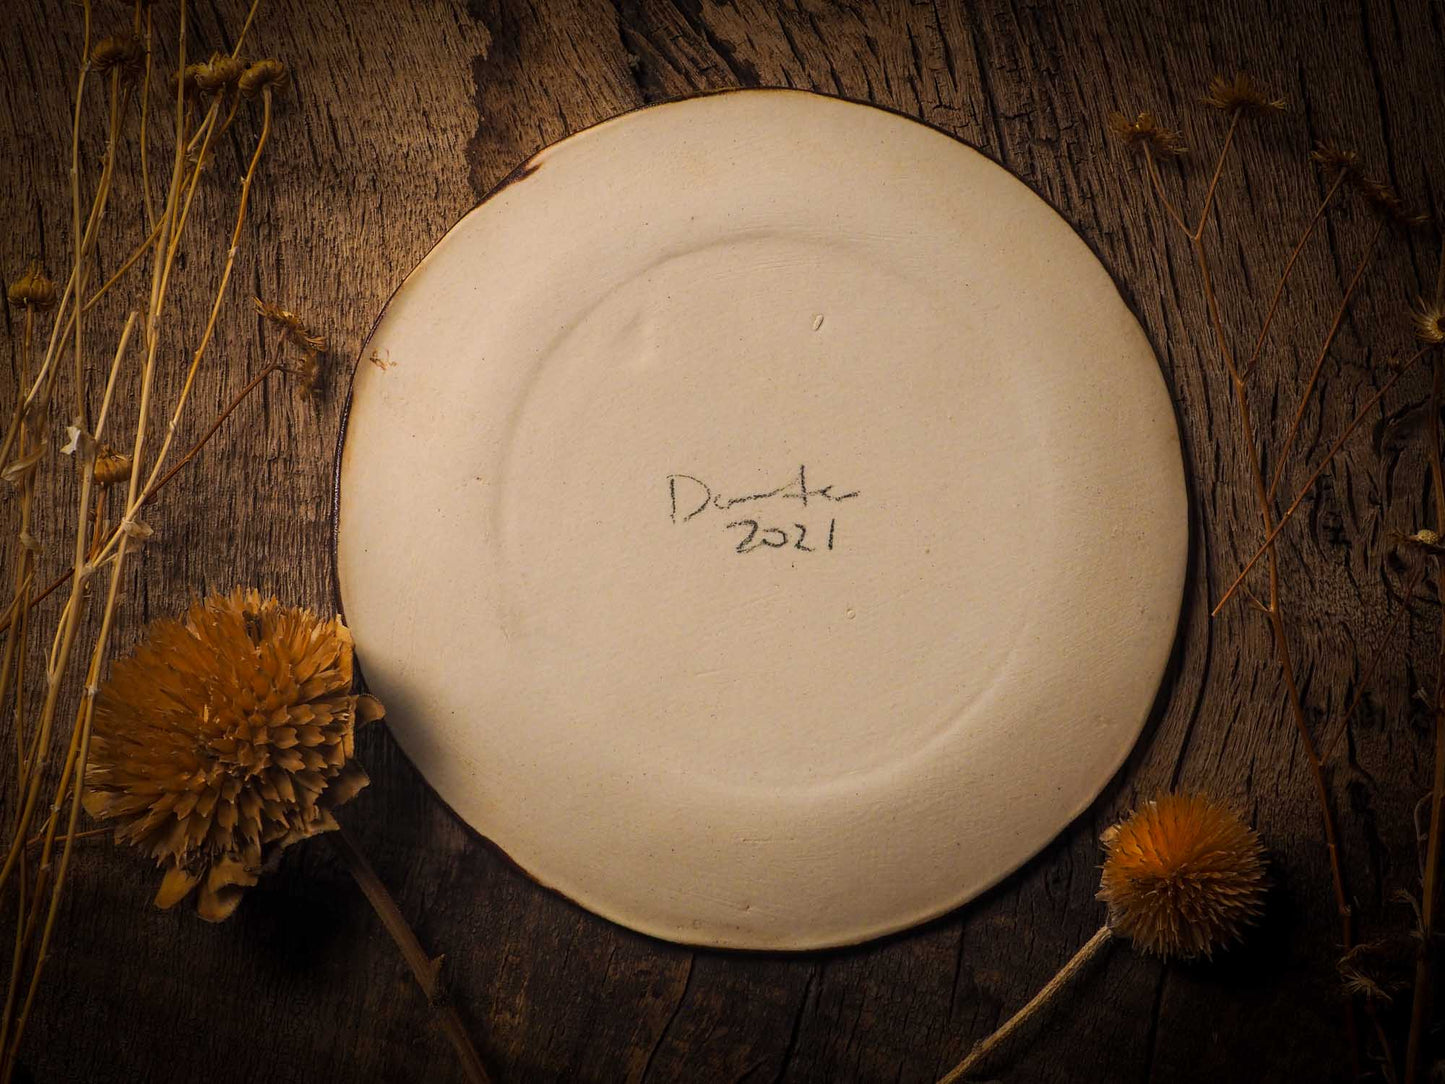 This one of a kind hand made, glazed ceramic cake plate is hand sculpted, painted and glazed by me, Idania Salcido, the artist behind Danita Art, using my very own kiln. The painting underneath the food safe glaze has a dreamy, watercolor feel to it, with a touch of vintage, so they look old, worn out.